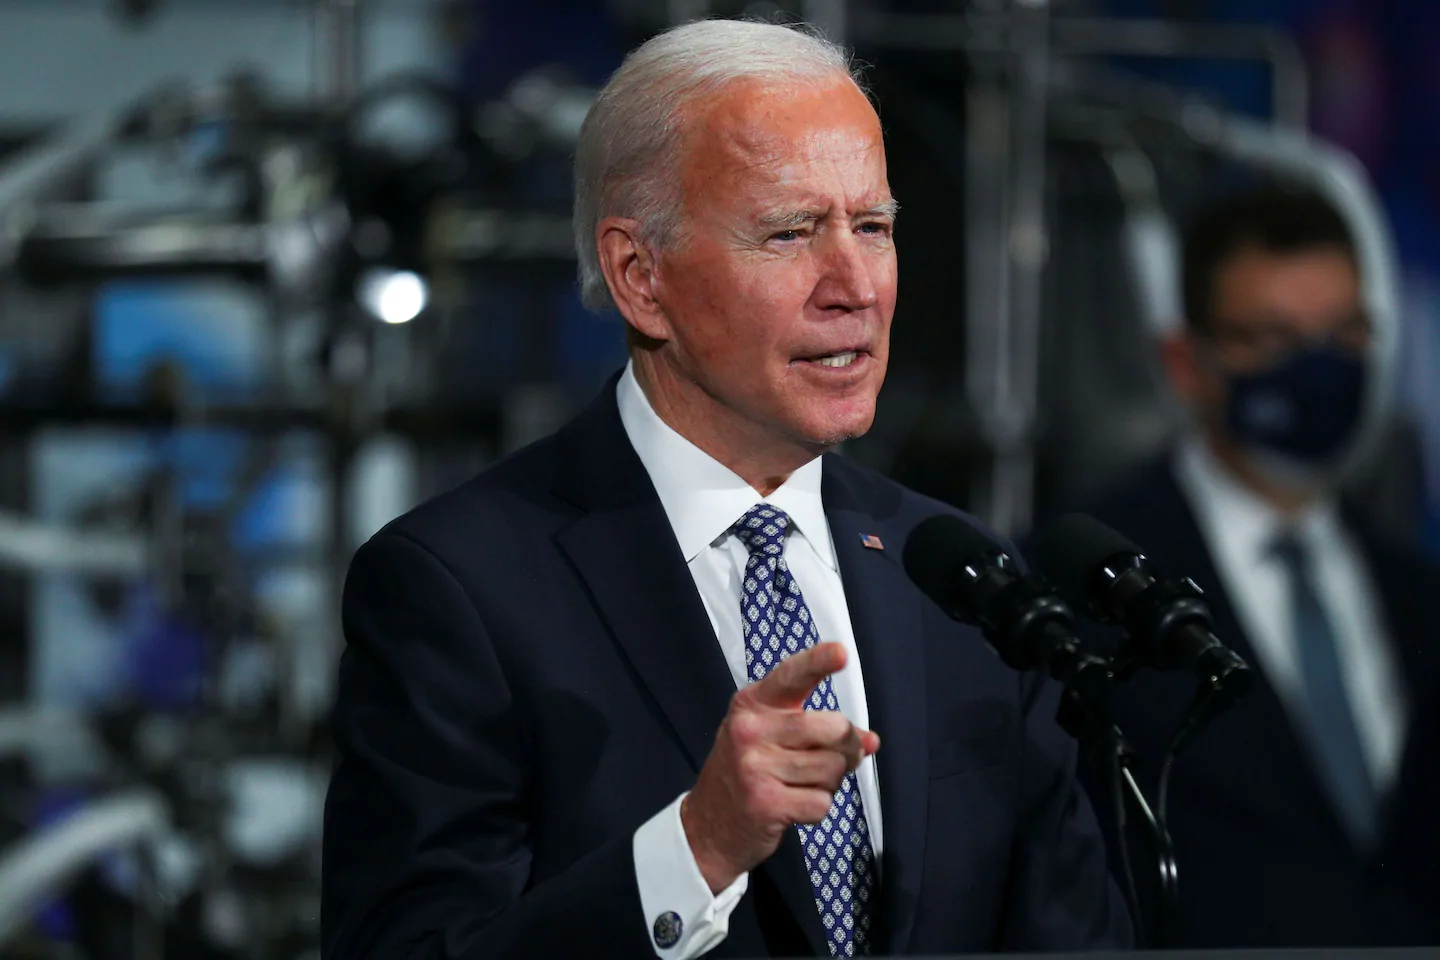  Biden to critics of $1.9 trillion relief plan: ‘What would they have me cut?’